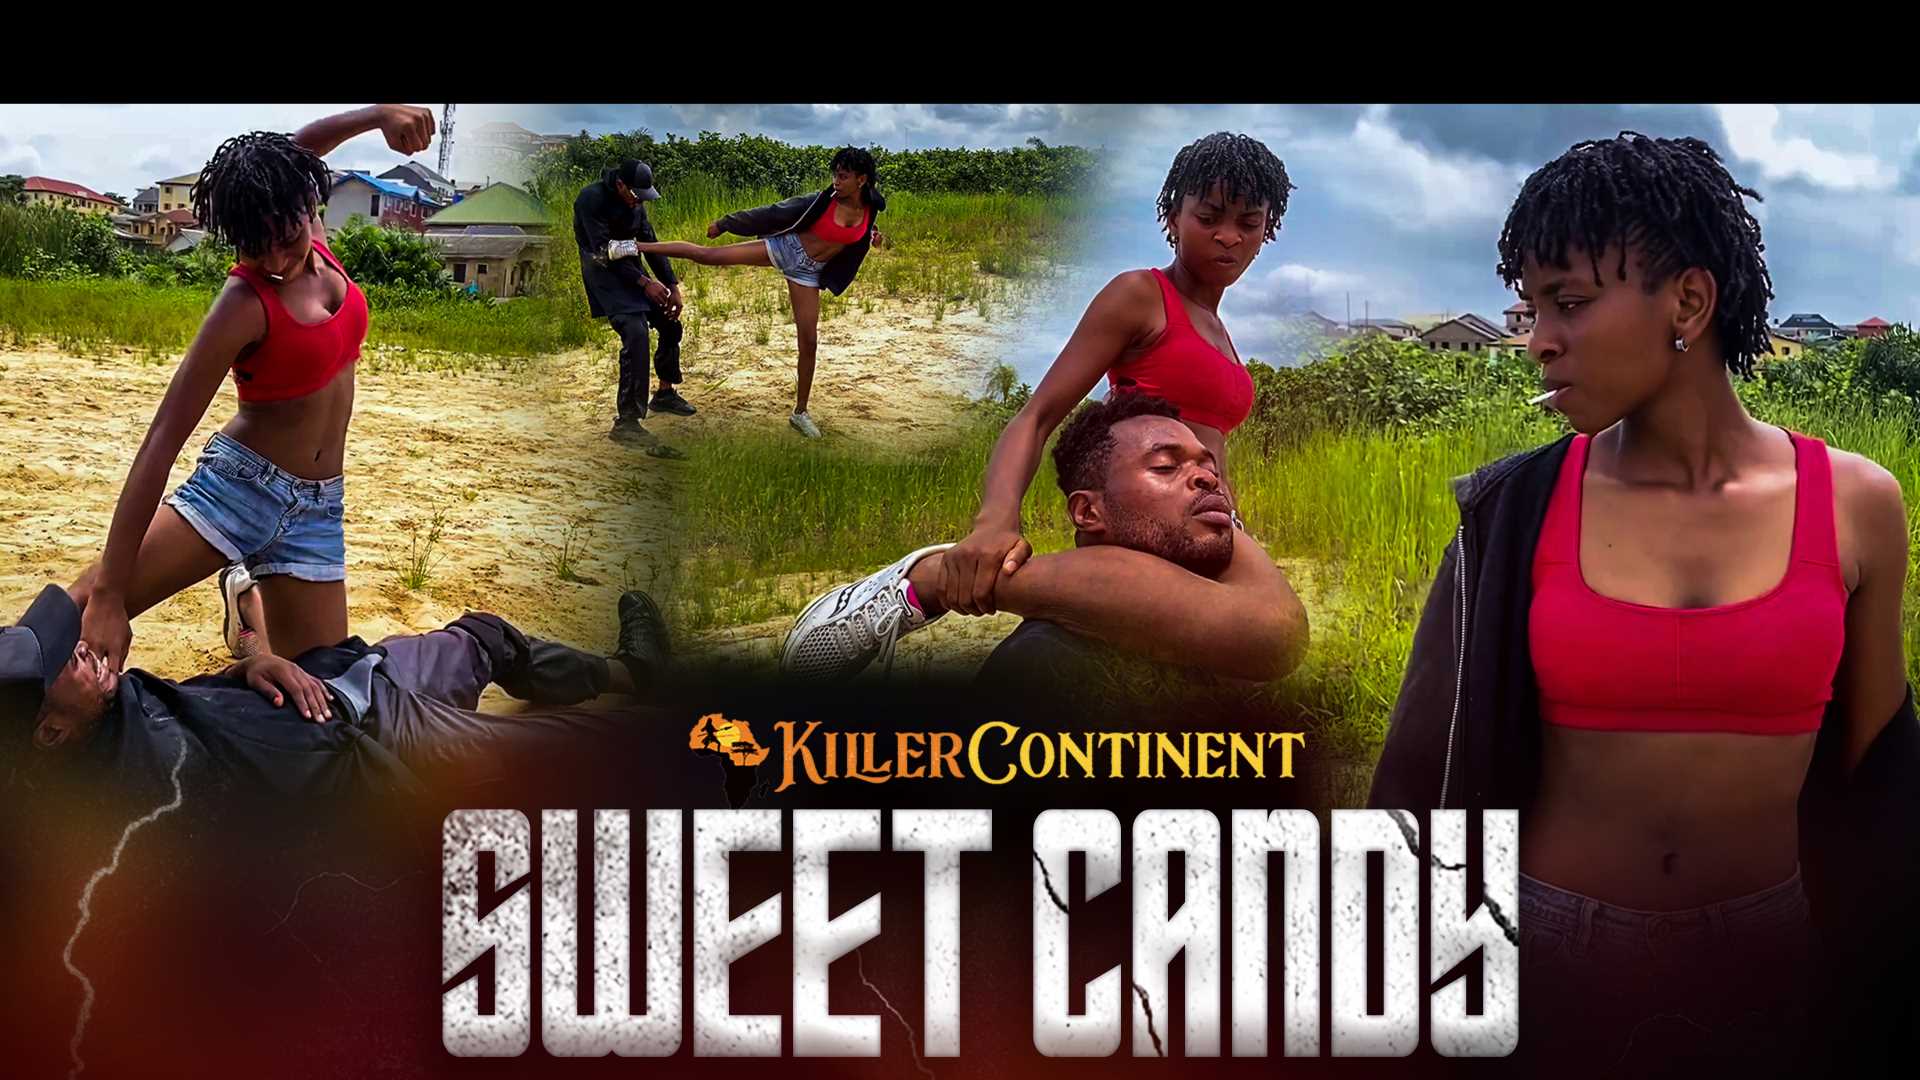 #2 - Sweet Candy